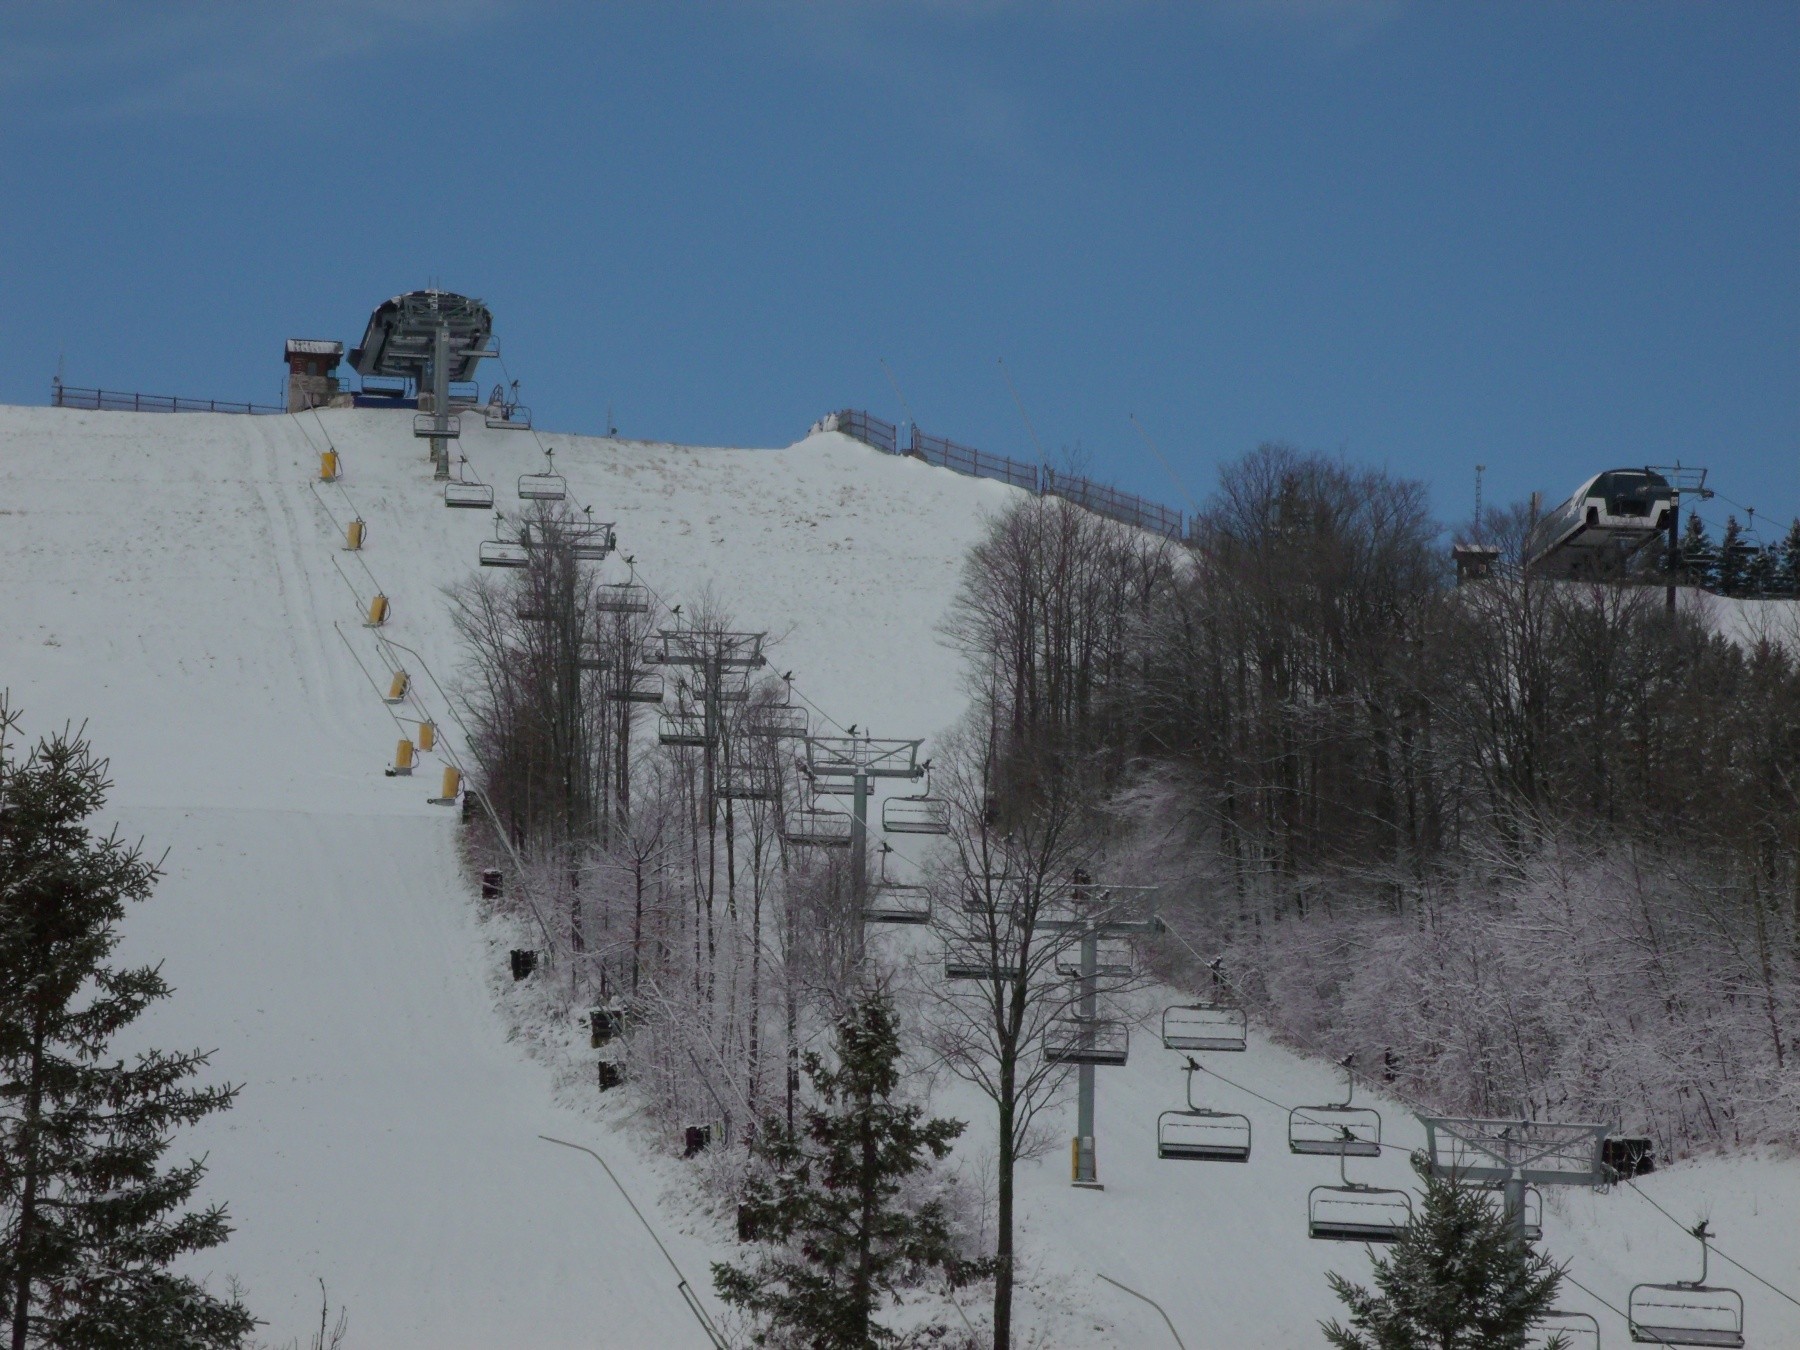 $35 Lift Tickets Weekdays in January at MSLM! - Mount St. Louis Moonstone